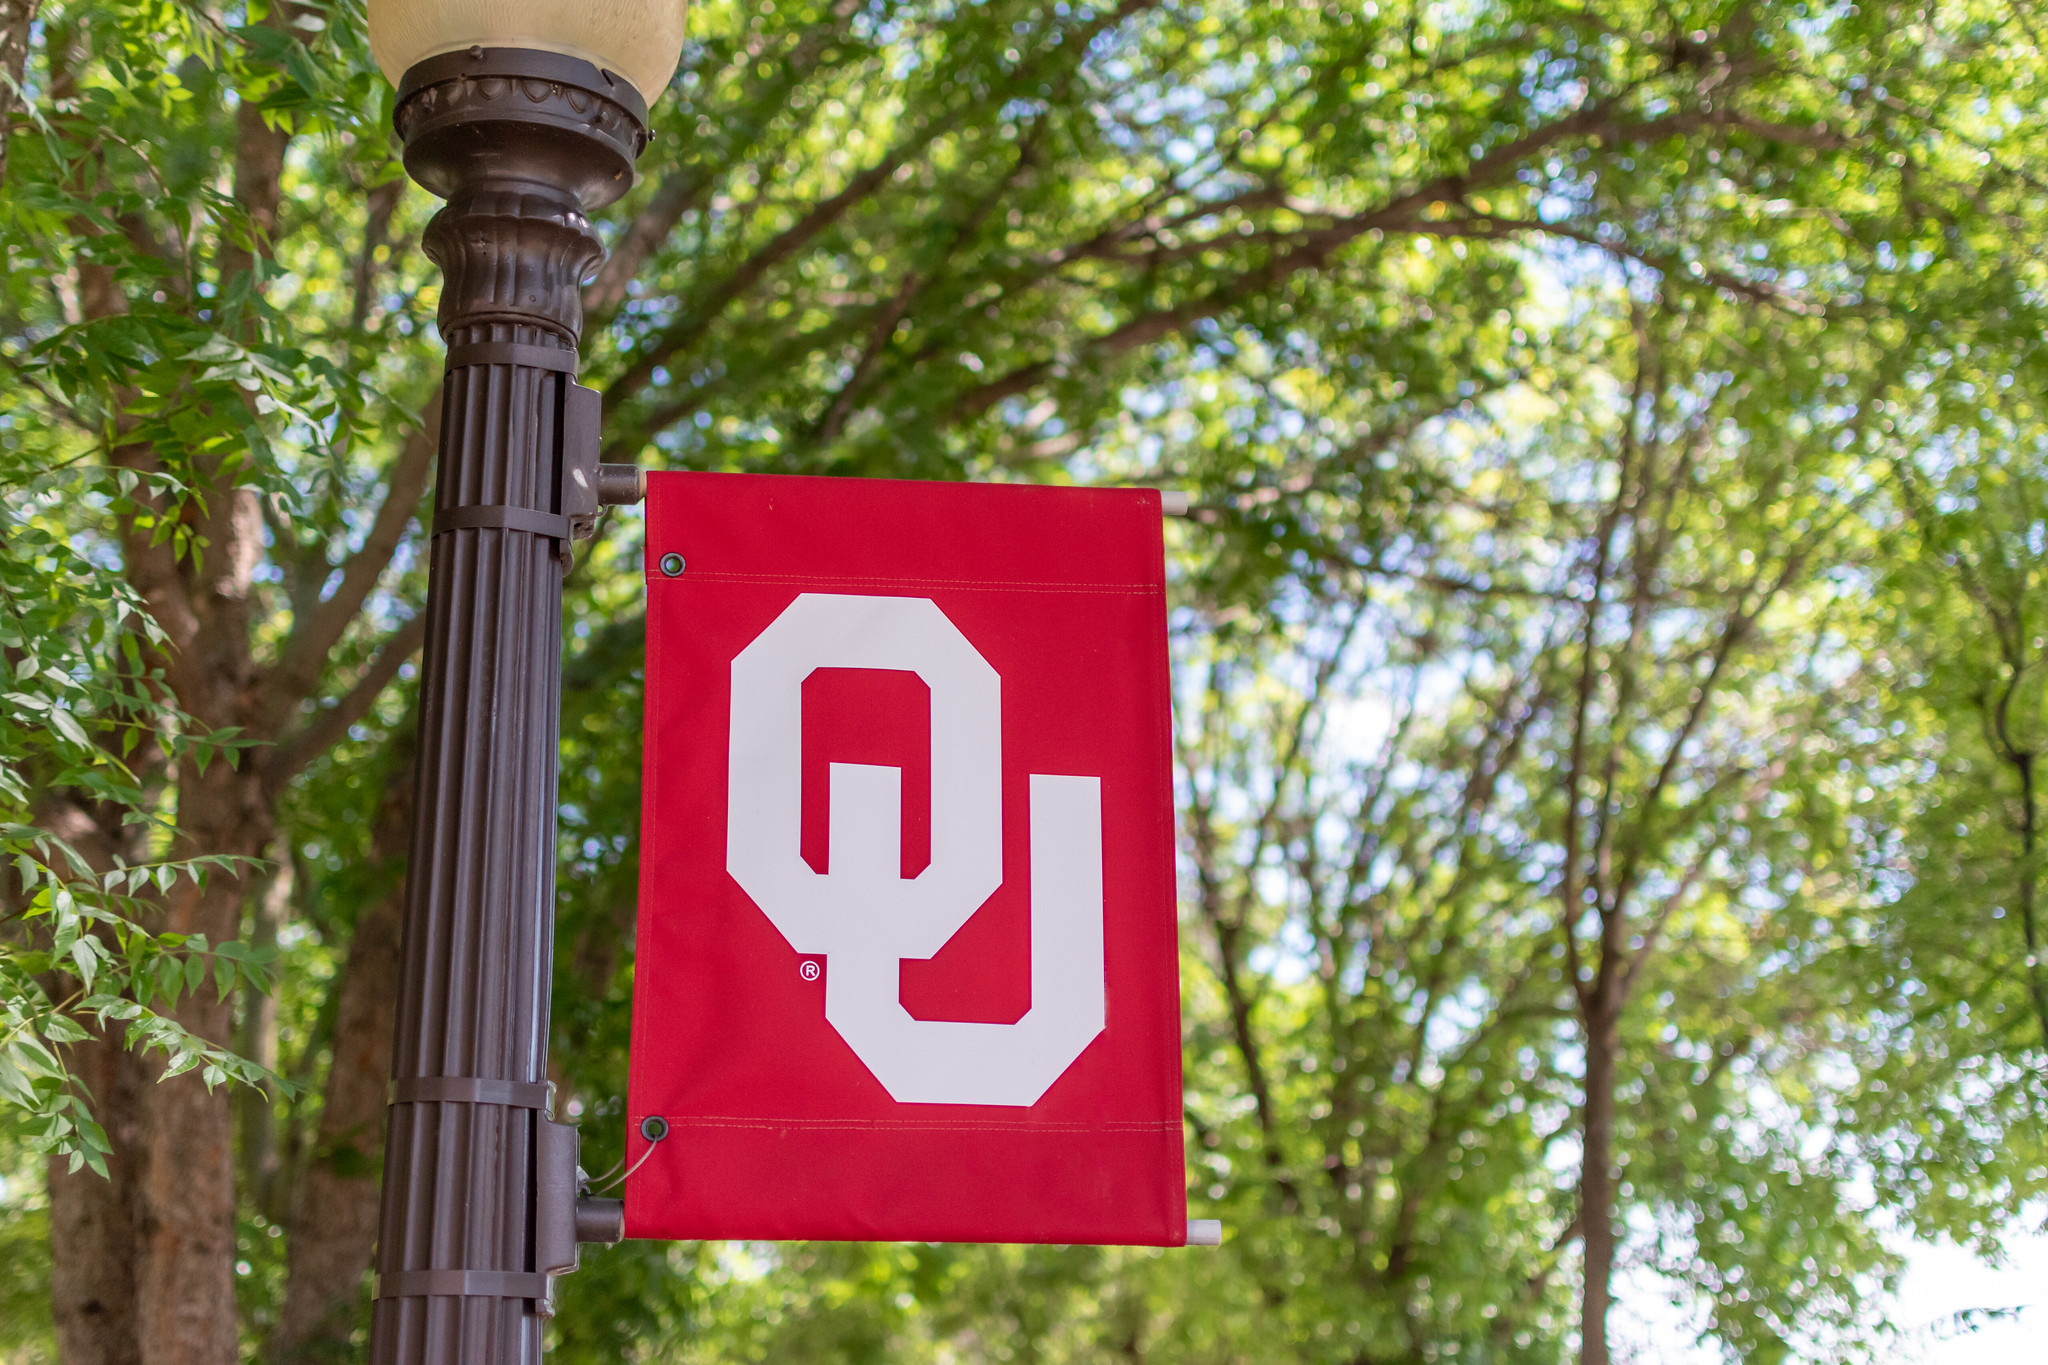 OU flag with trees in the background.